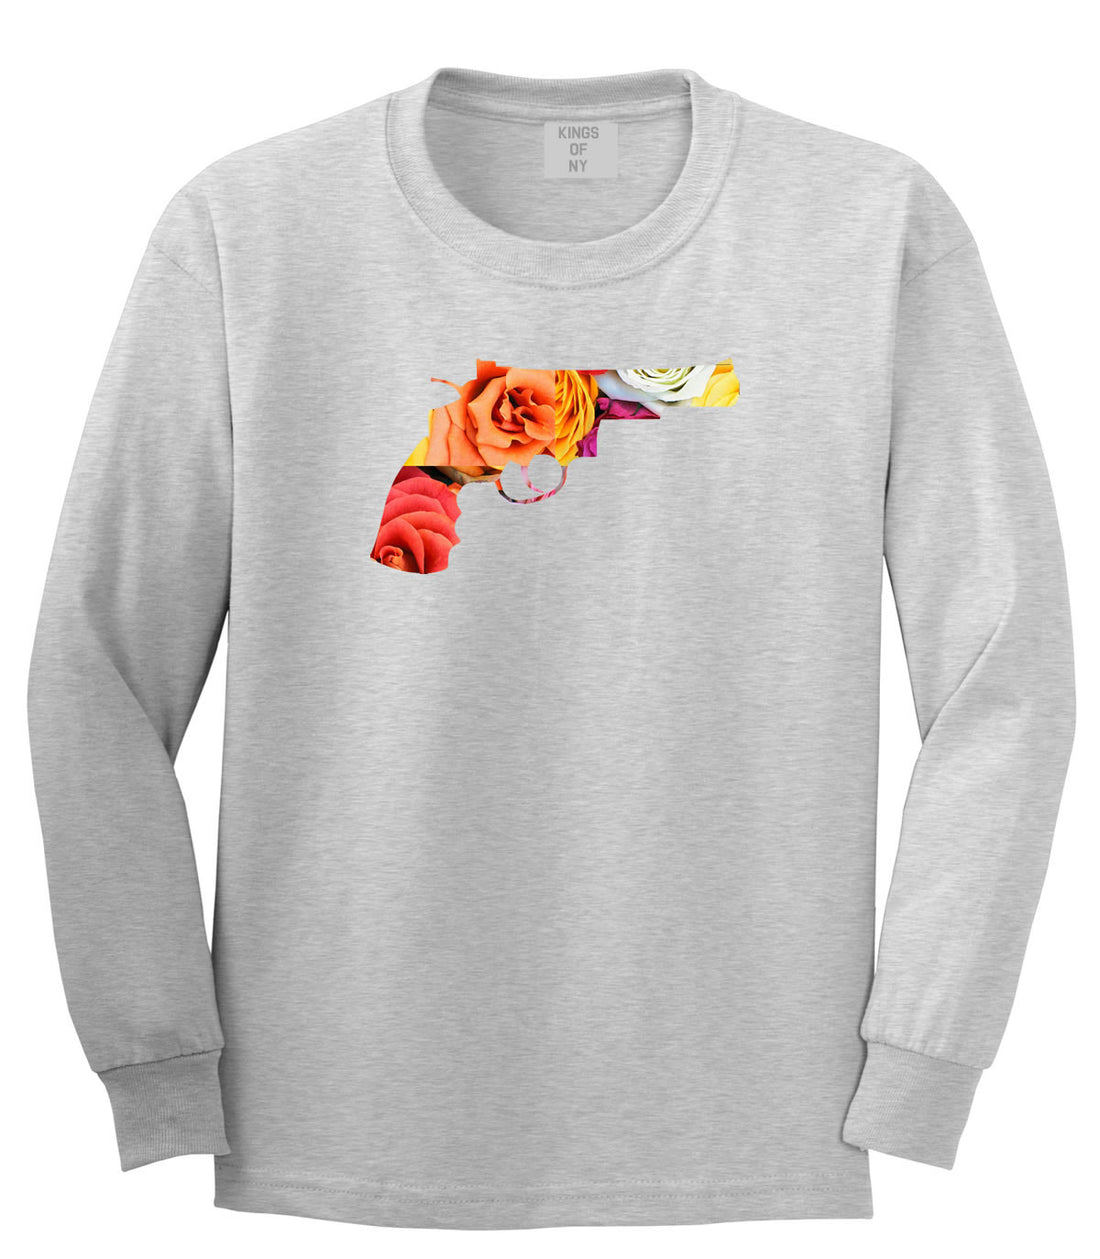 Floral Gun Flower Print Colt 45 Revolver Long Sleeve T-Shirt In Grey by Kings Of NY